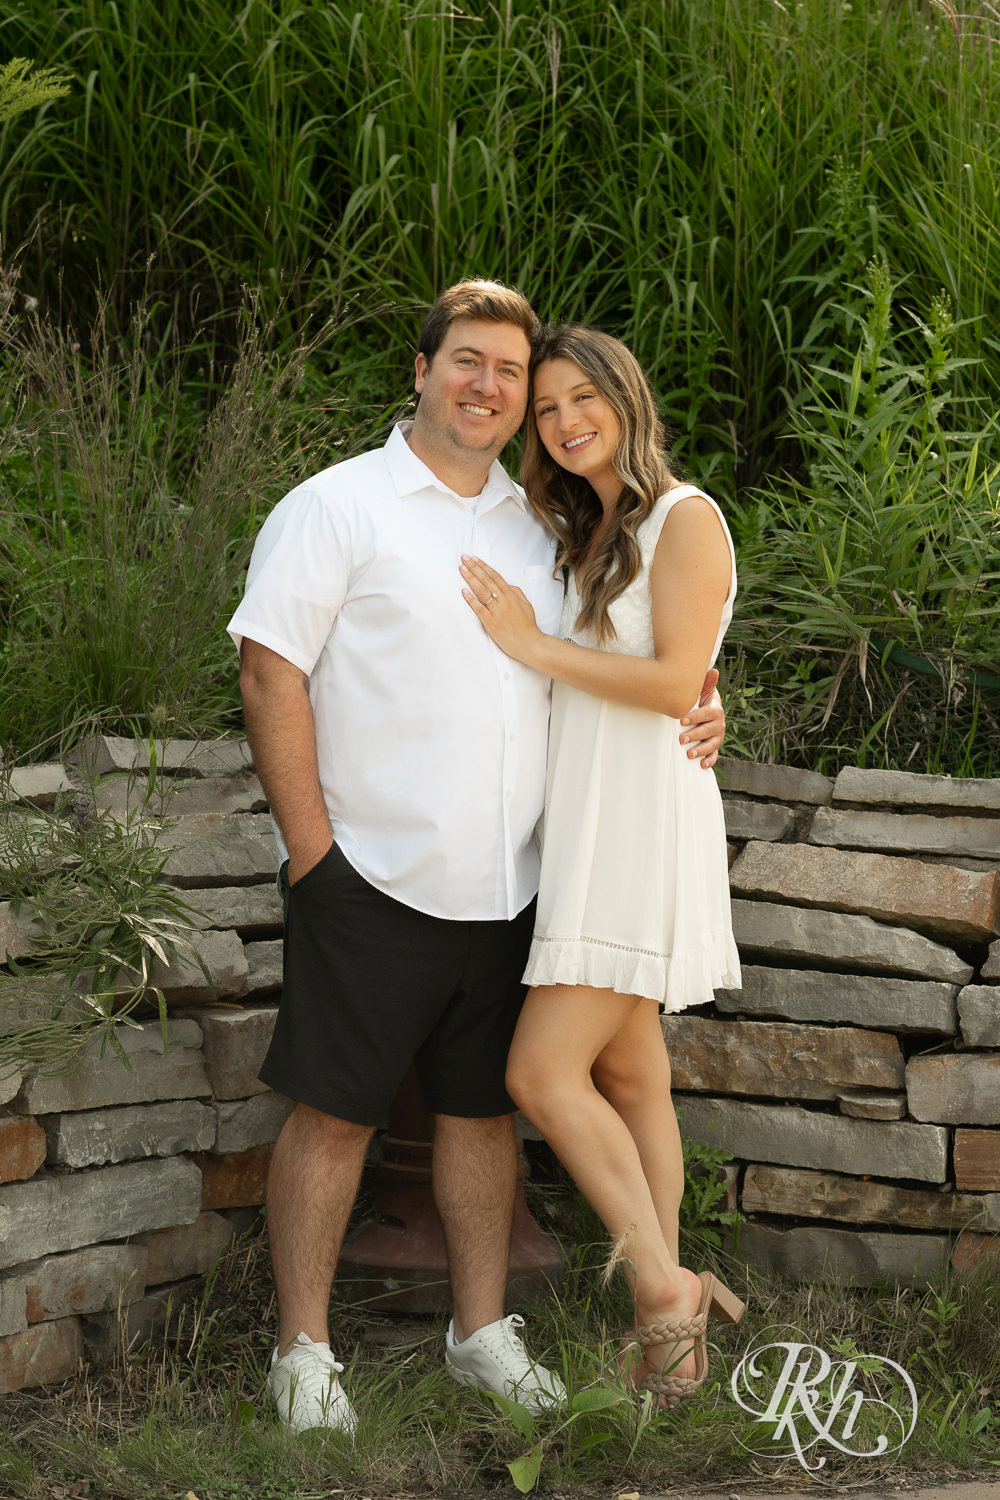 Man and woman in white dress smile during engagement photography at Centennial Lakes Park in Edina, Minnesota.